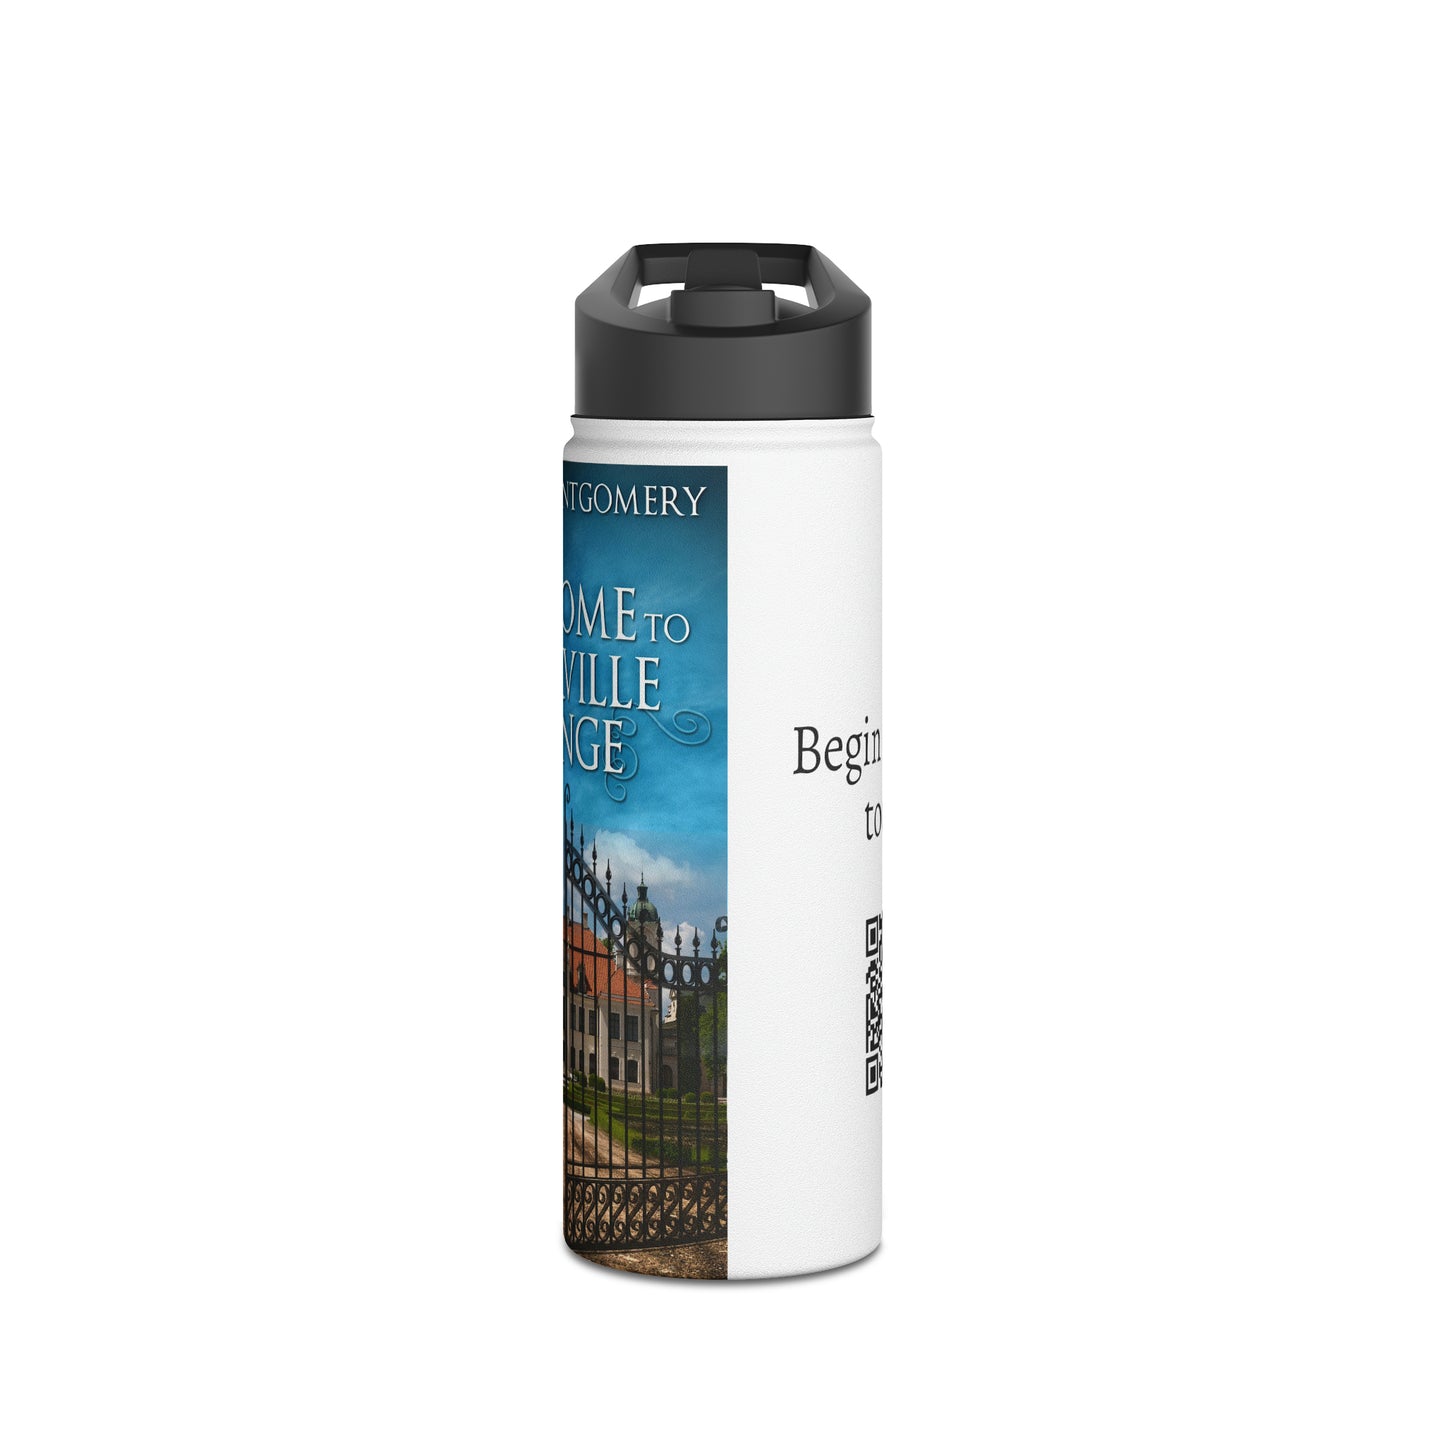 Welcome To Somerville Grange - Stainless Steel Water Bottle